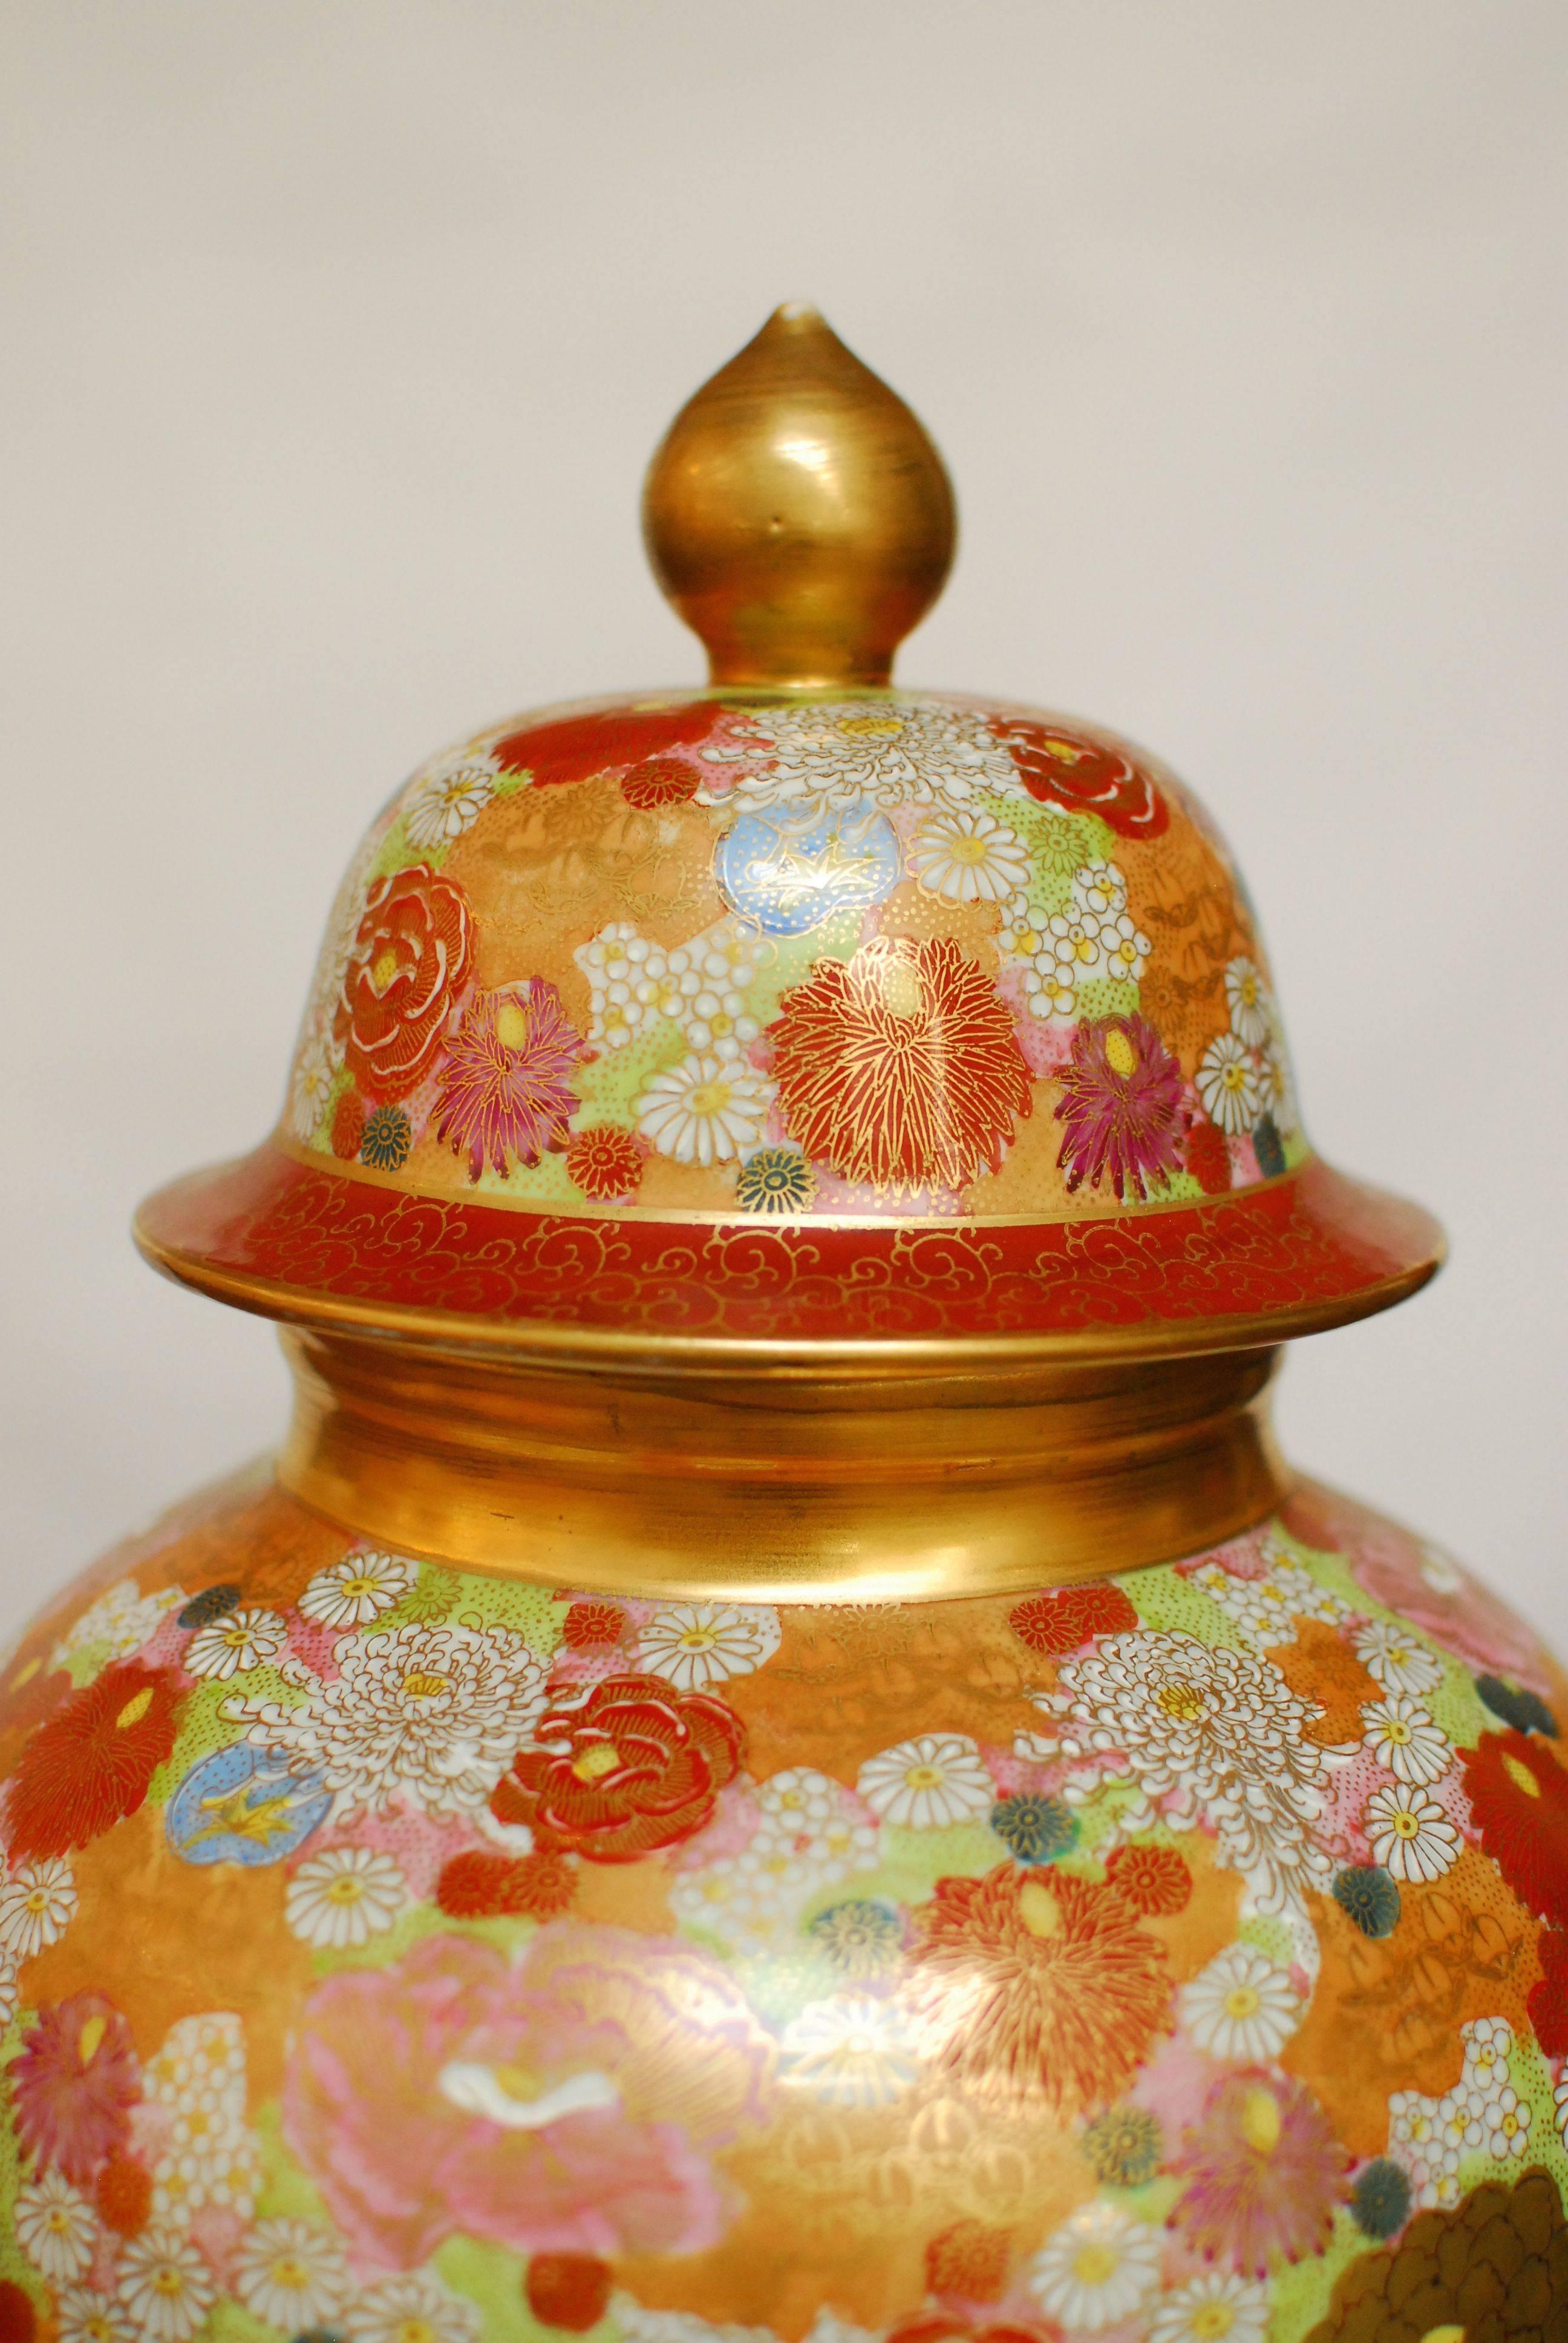 Japanese Satsuma ware ginger jar featuring a mille fleur design and gilt trim. Vibrant colors and marked on bottom.